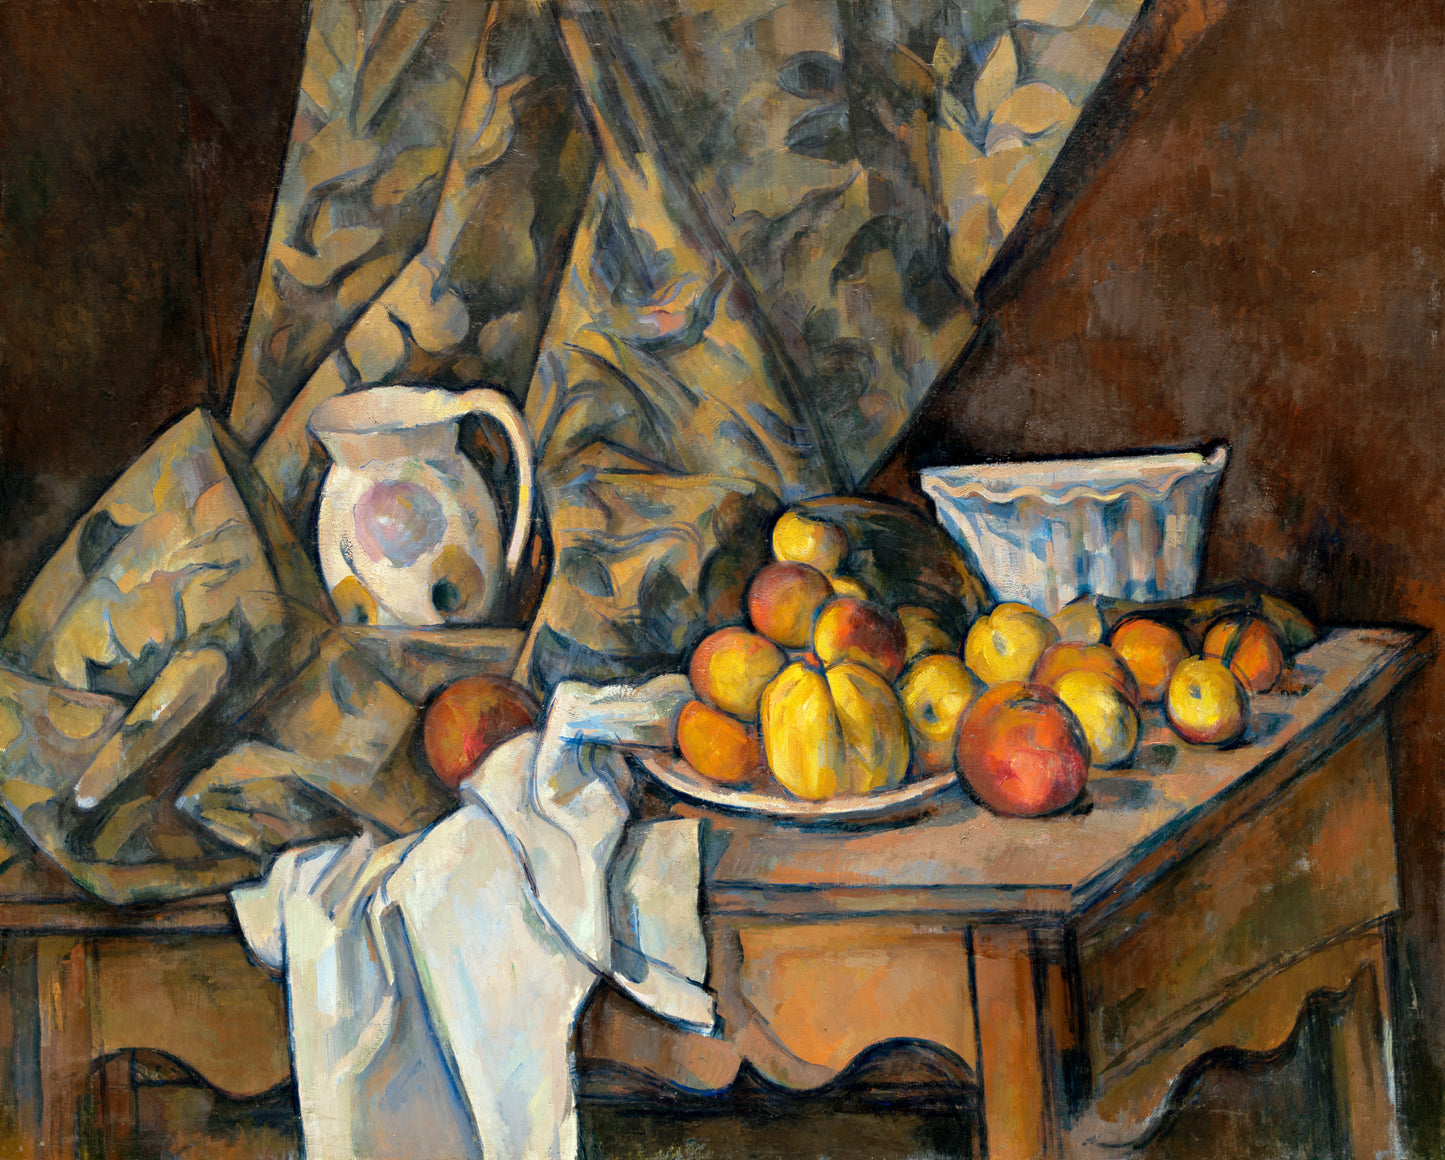 Paul Cezanne - Still Life with Apples and Peaches 1905 - Digital Art - JPG File Download